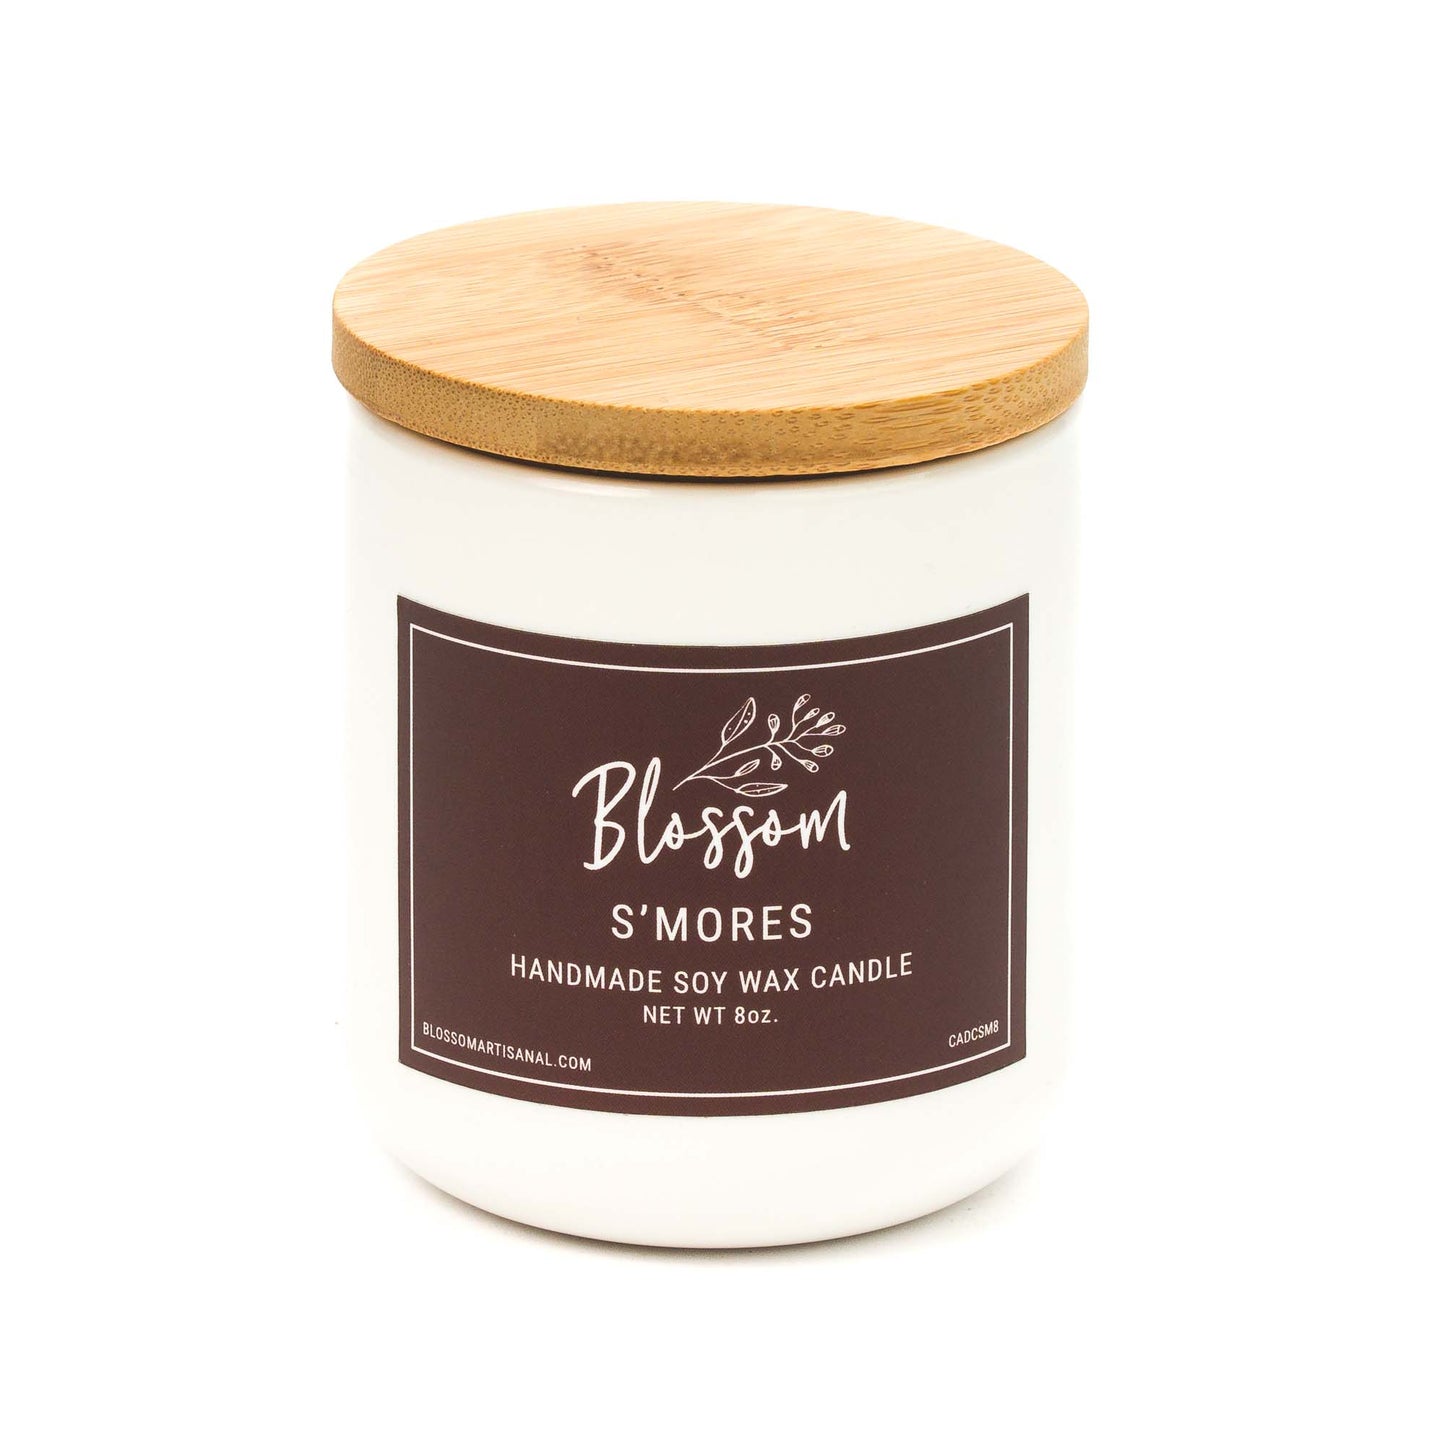 White Ceramic Decorative Soy Wax Candle Essential Oil Scent 8oz S'mores